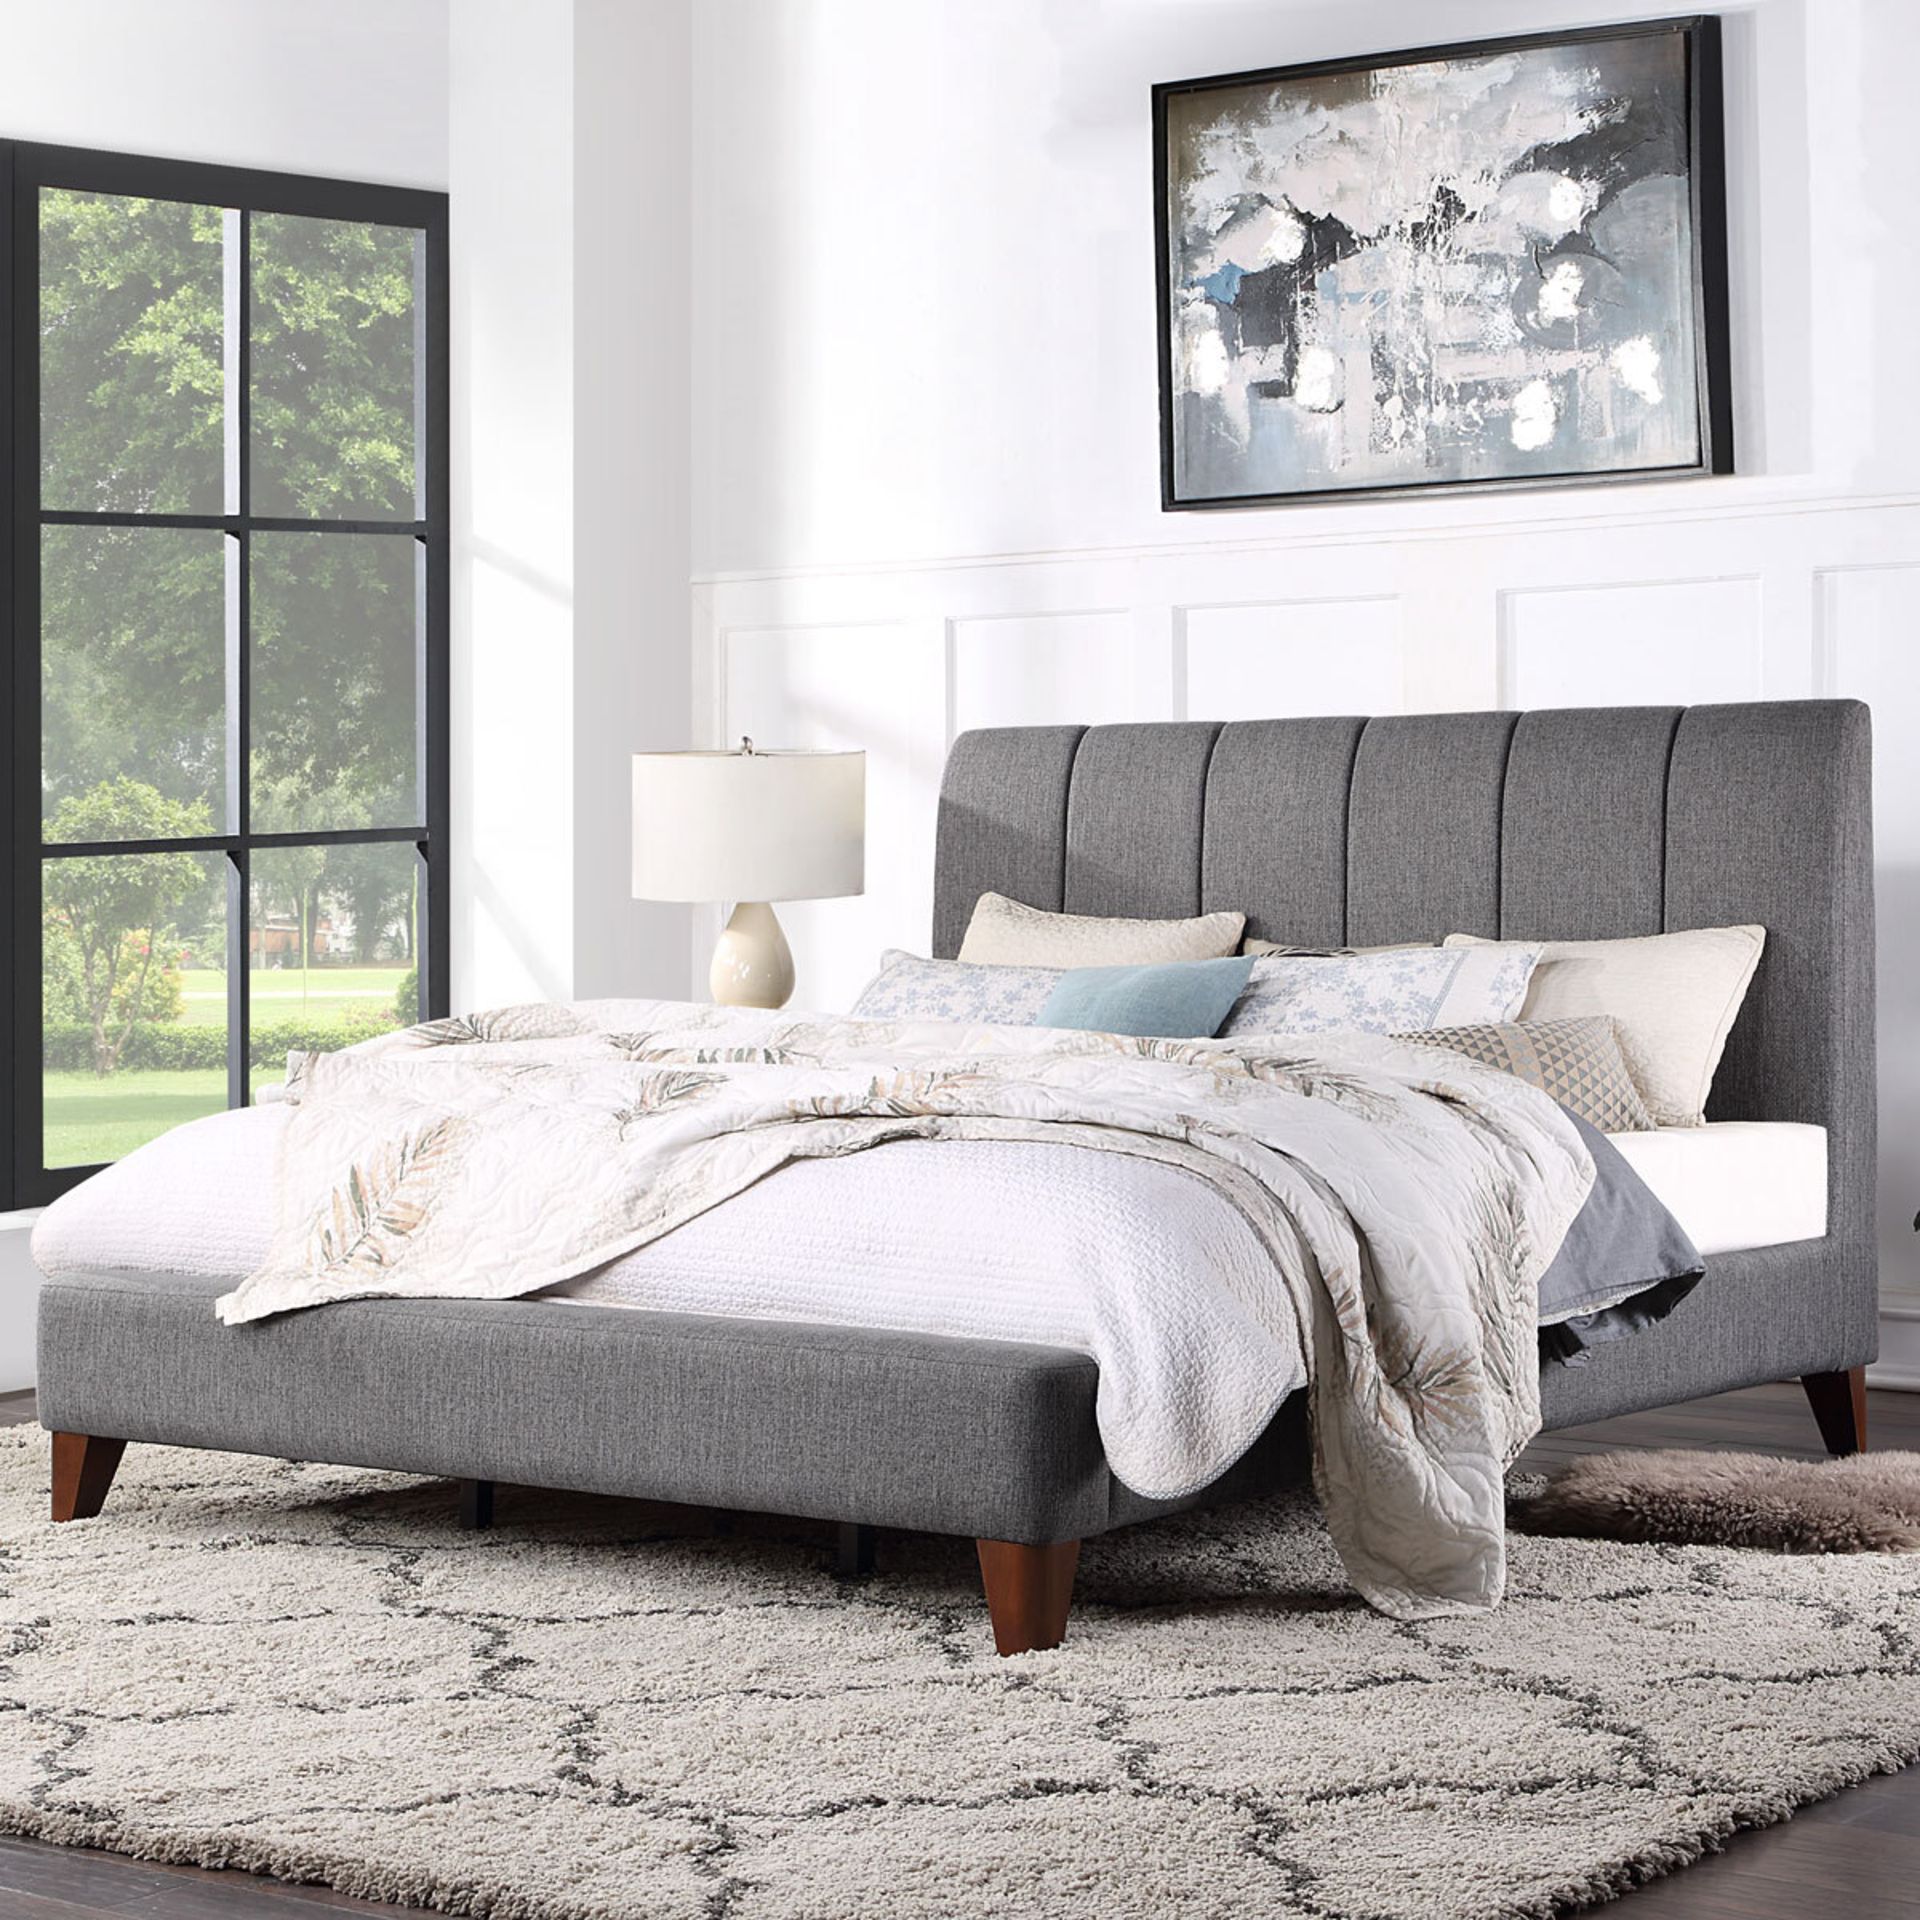 1 NORTHRIDGE HOME GREY UPHOLSTERED BED FRAME, DOUBLE SIZE RRP Â£449 (FRAME THAT HOLDS THE SLATS